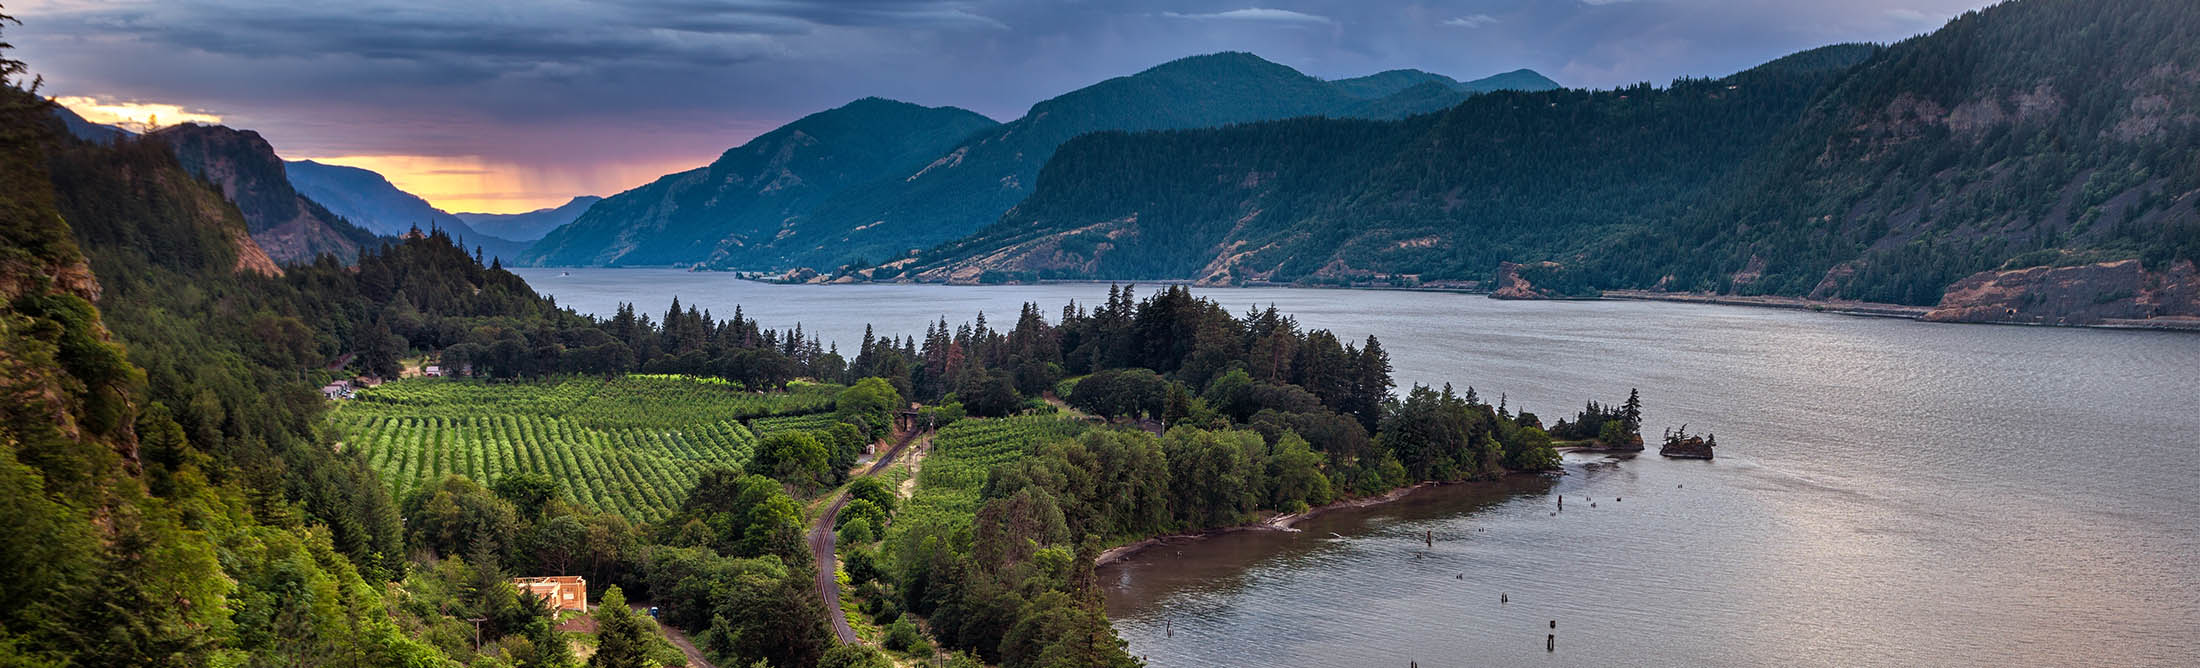 Columbia River Gorge Guide: Restaurants, Wineries, Hotels, Hikes